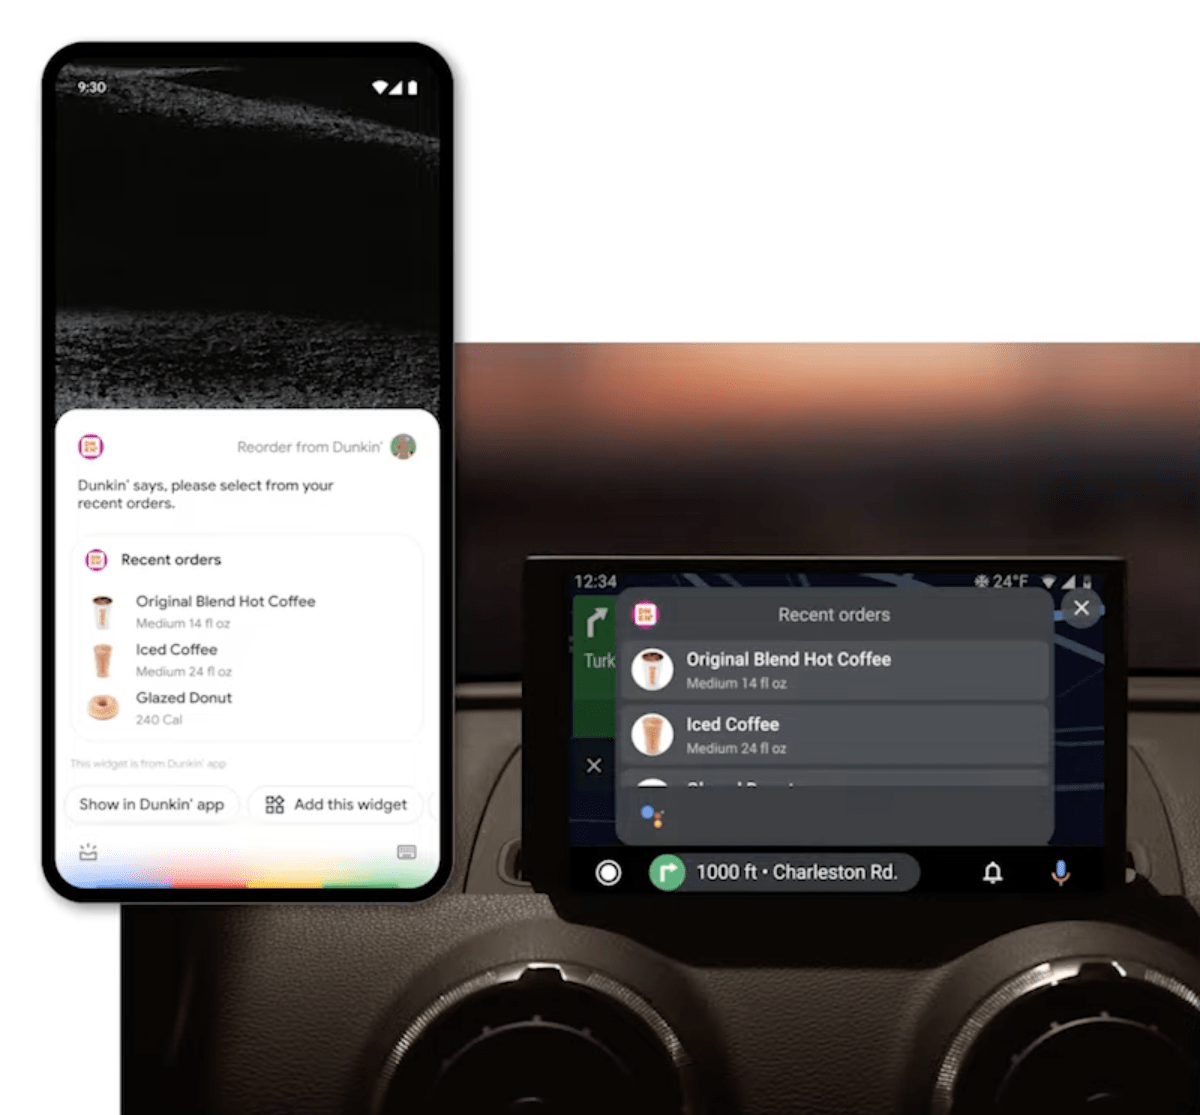 Android widgets can show up in Assistant as Google looks at surfacing in Android Auto